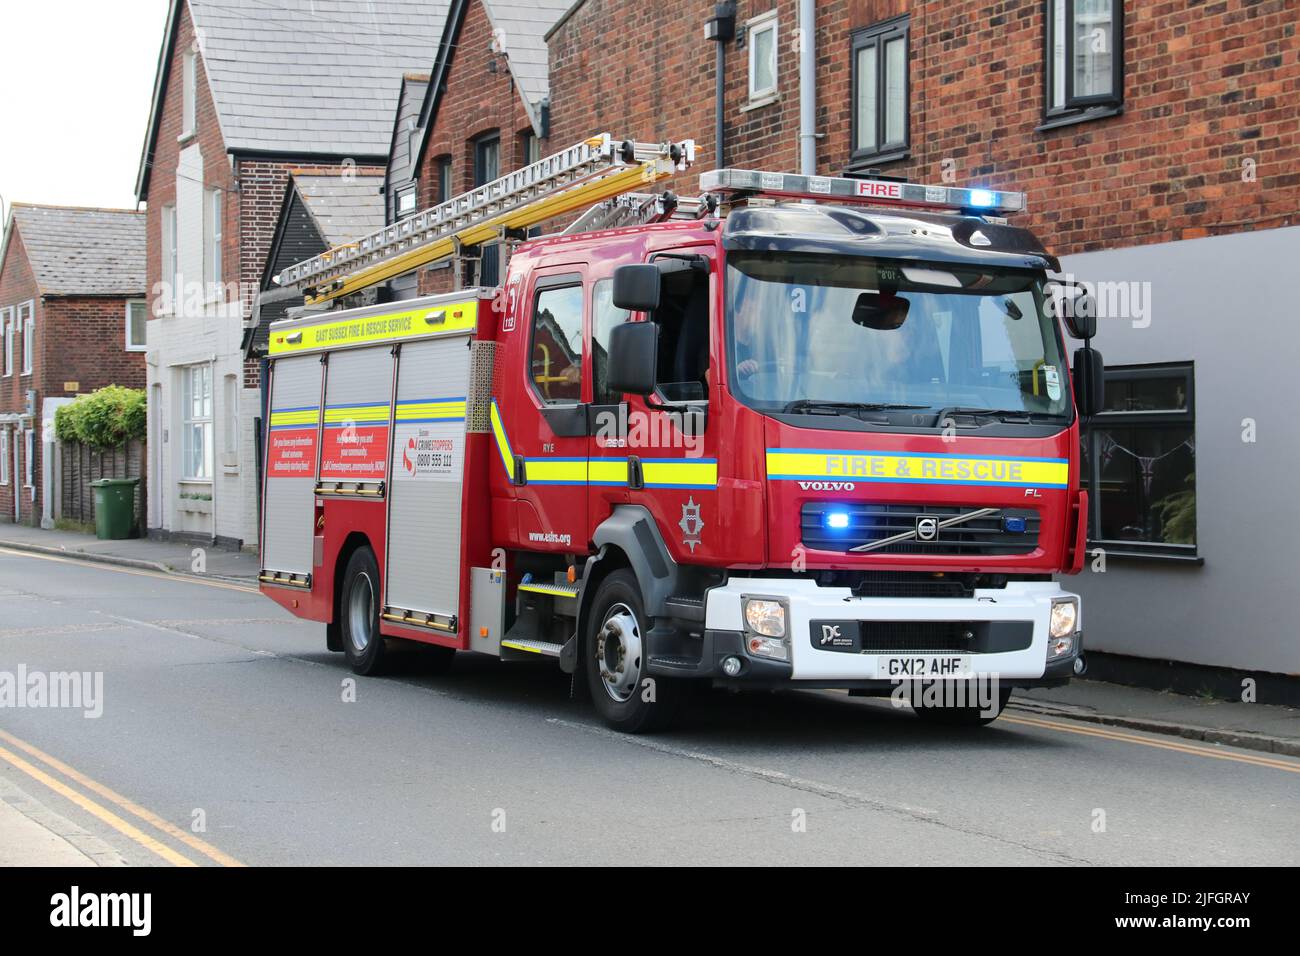 A VOLVO FIRE TRUCK OF EAST SUSSEX FIRE & RESCUE SERVICE ON AN EMERGENCY 999 CALL IN RYE WITH BLUE LIGHTS FLASHING Stock Photo